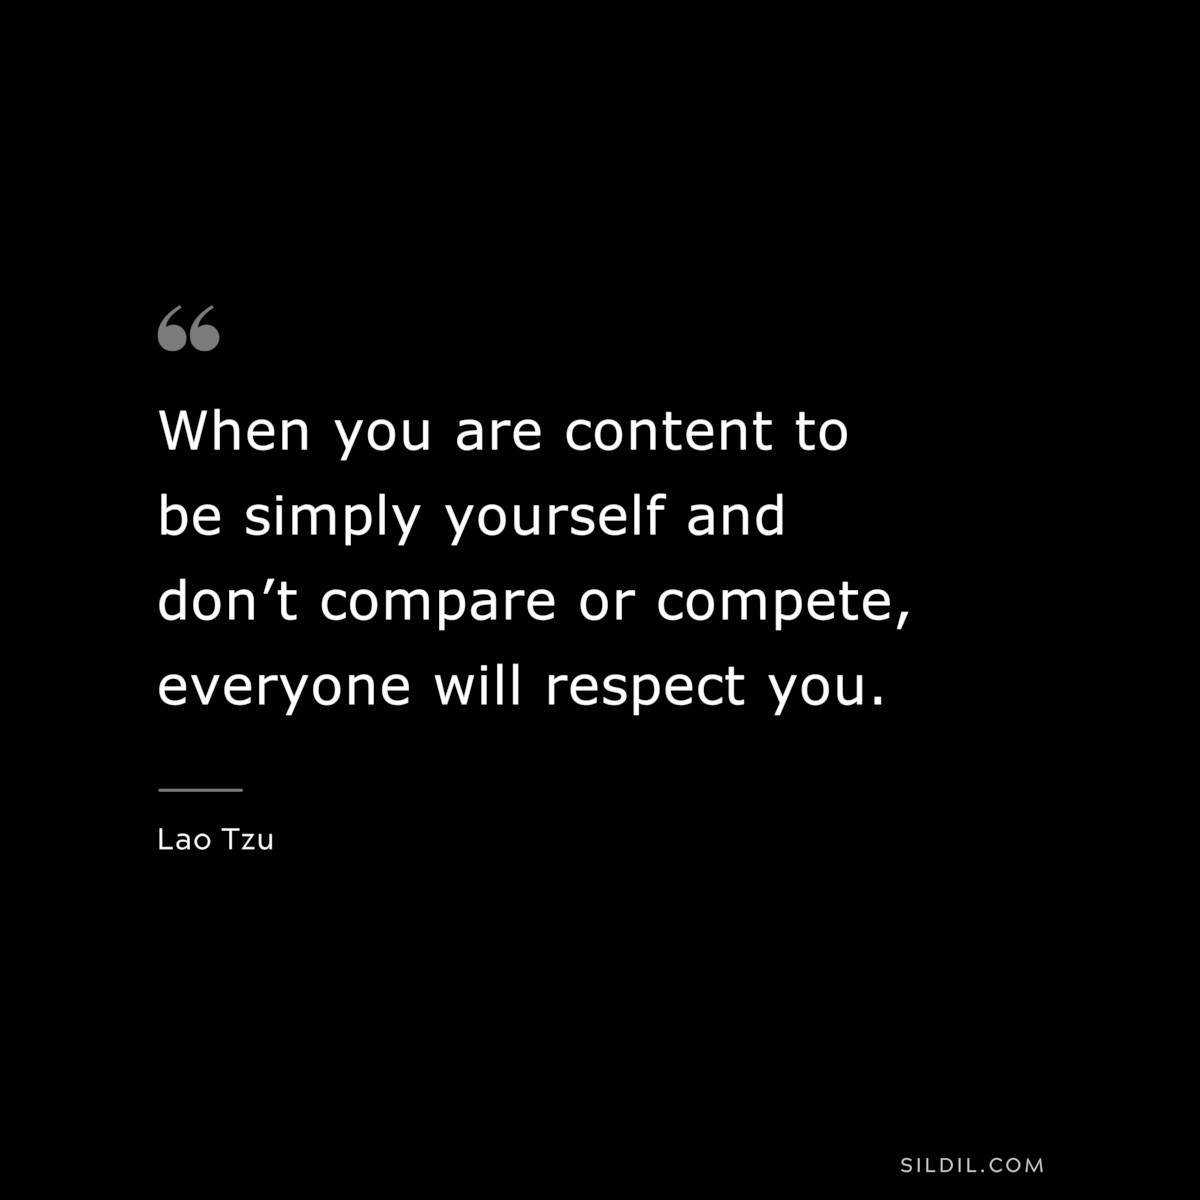 When you are content to be simply yourself and don’t compare or compete, everyone will respect you. ― Lao Tzu